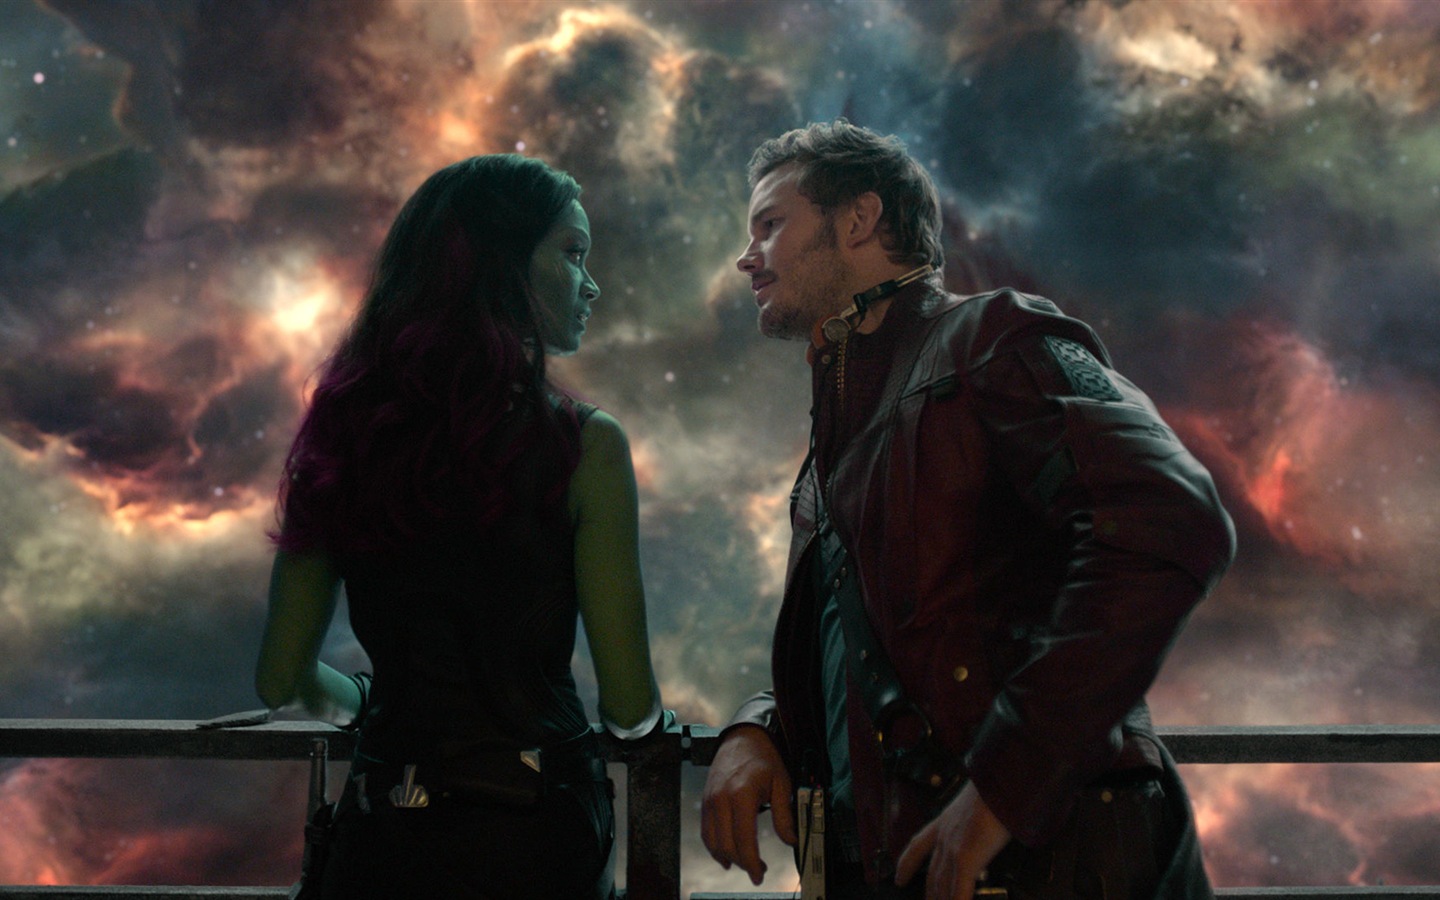 Guardians of the Galaxy 2014 HD movie wallpapers #11 - 1440x900